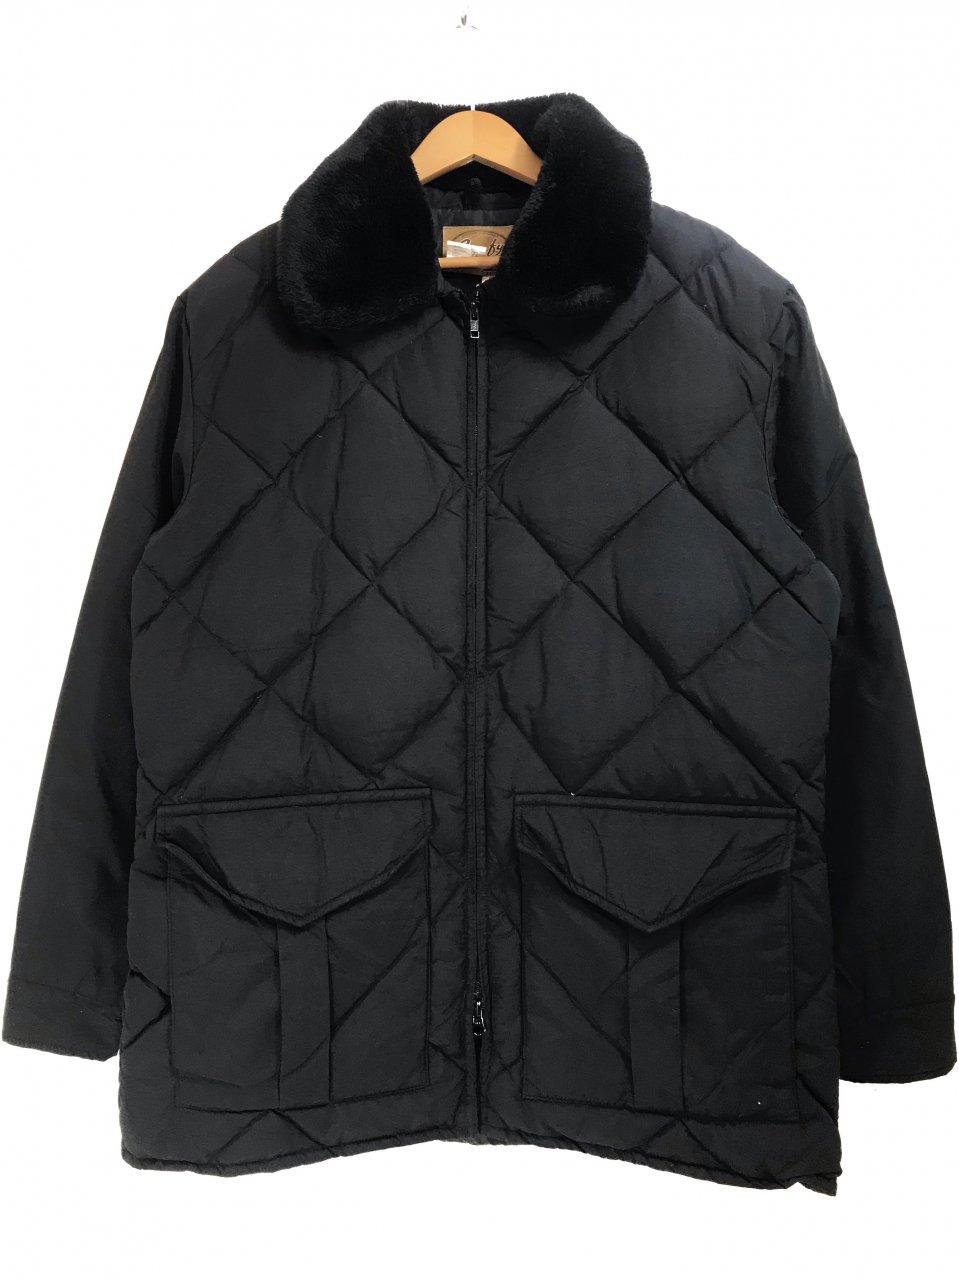 USA製 COMFY Quilting Down Jacket 黒 M コンフィー キルティング ...